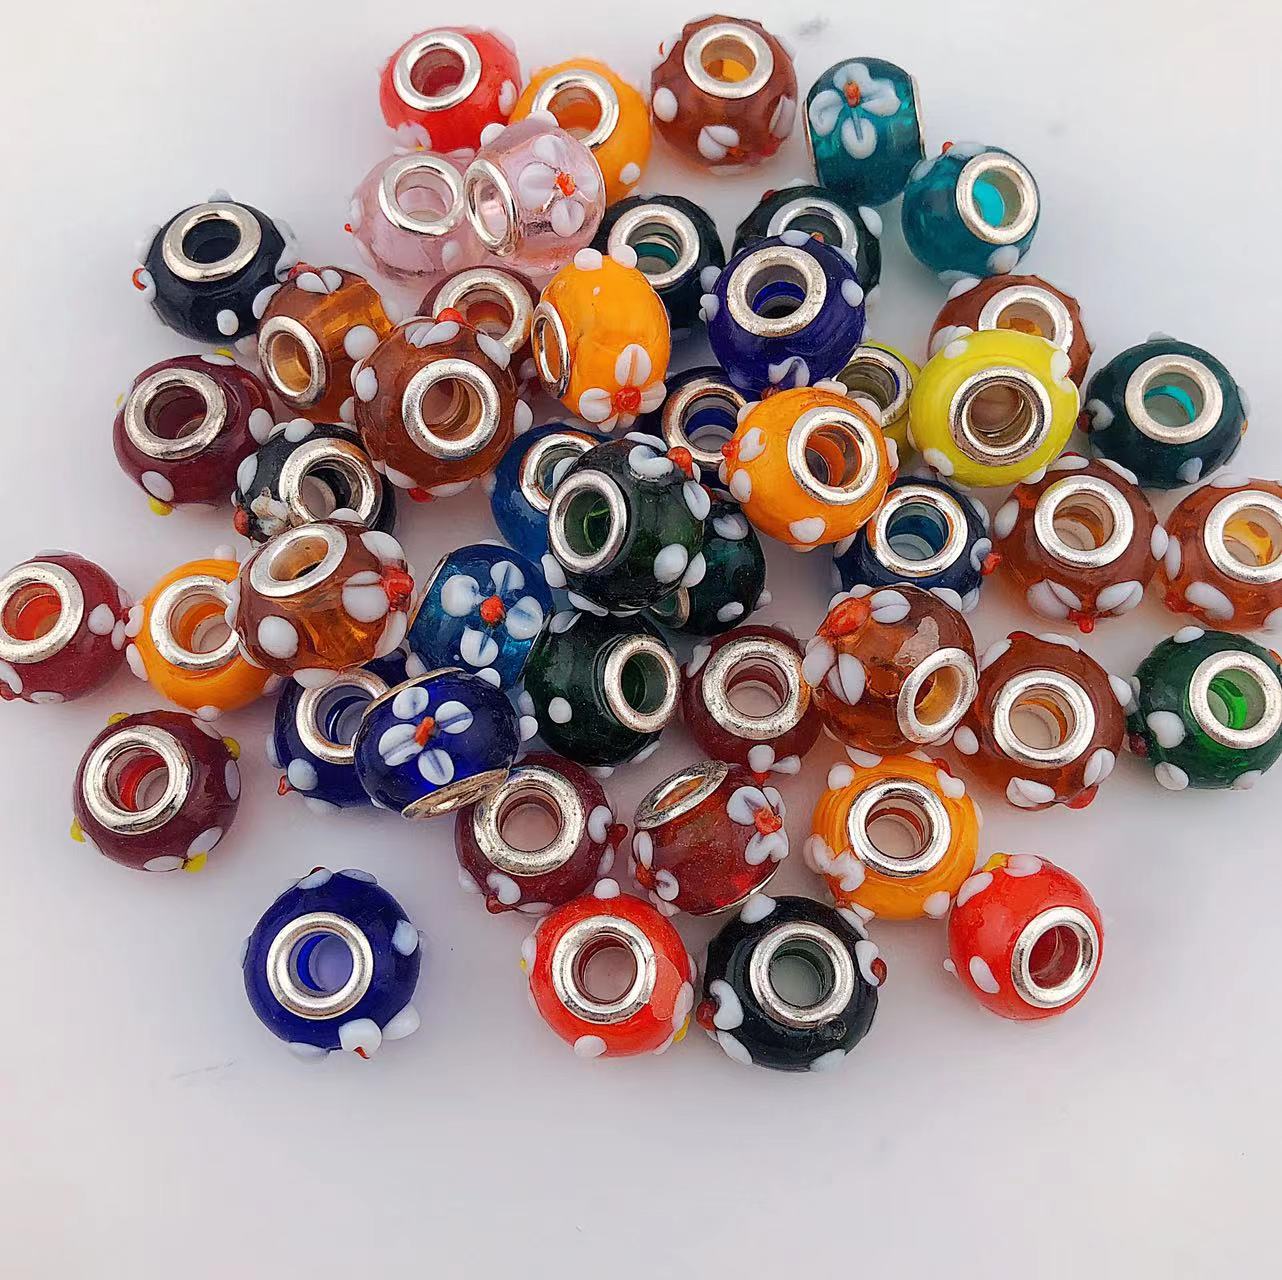 50 Pieces Mixed Color Flower Hand Painted Glass Pen Spacer